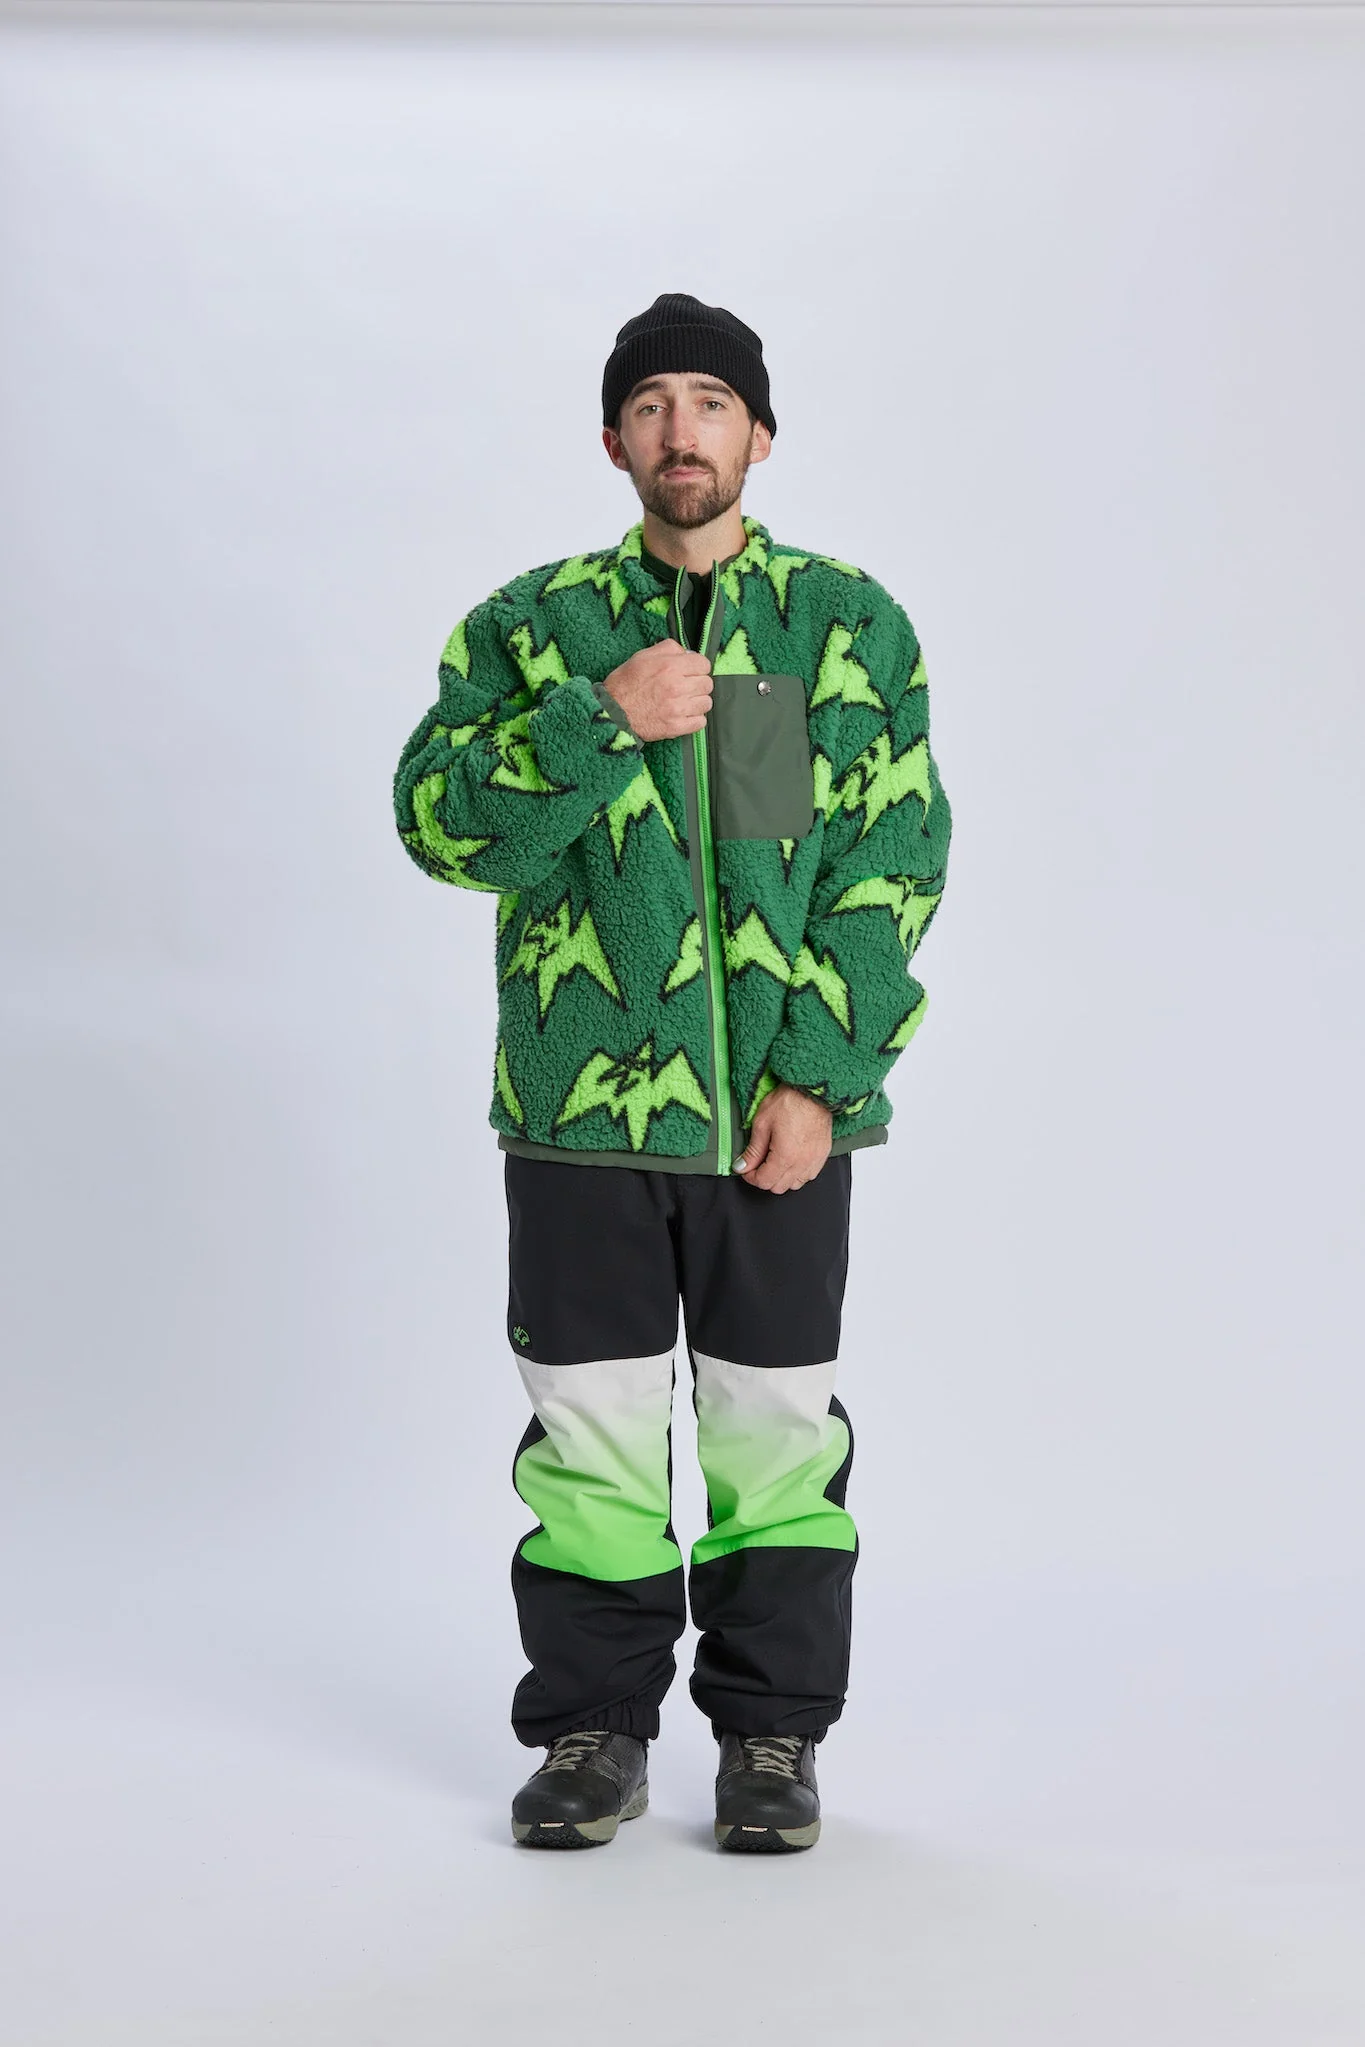 Airblaster Double Puff jacket max big terry